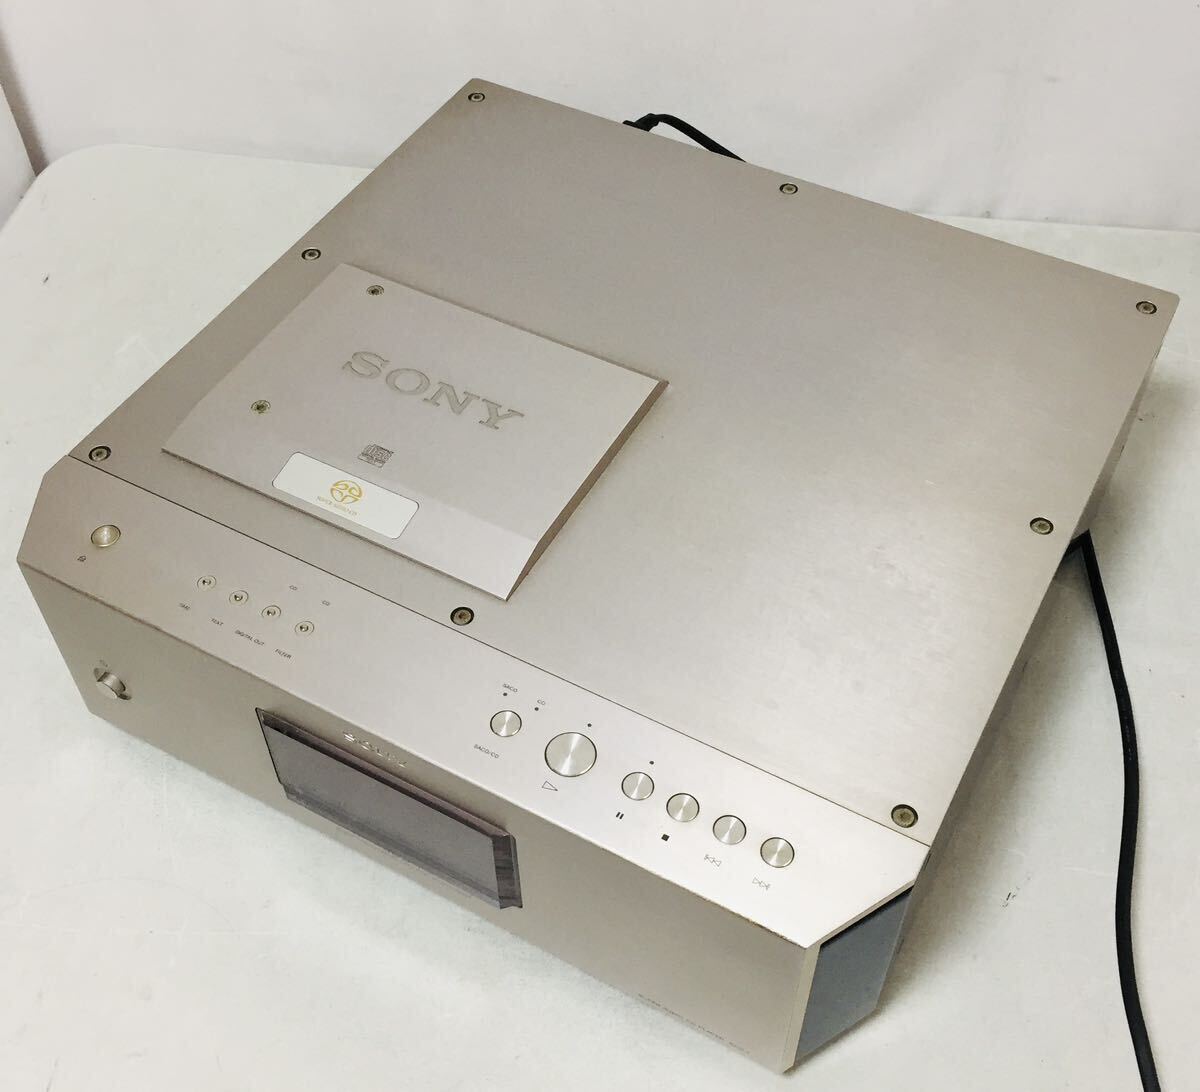  operation verification settled SONY Sony SCD-1 SACD player with stabilizer SACD. firmly operation does. 0310